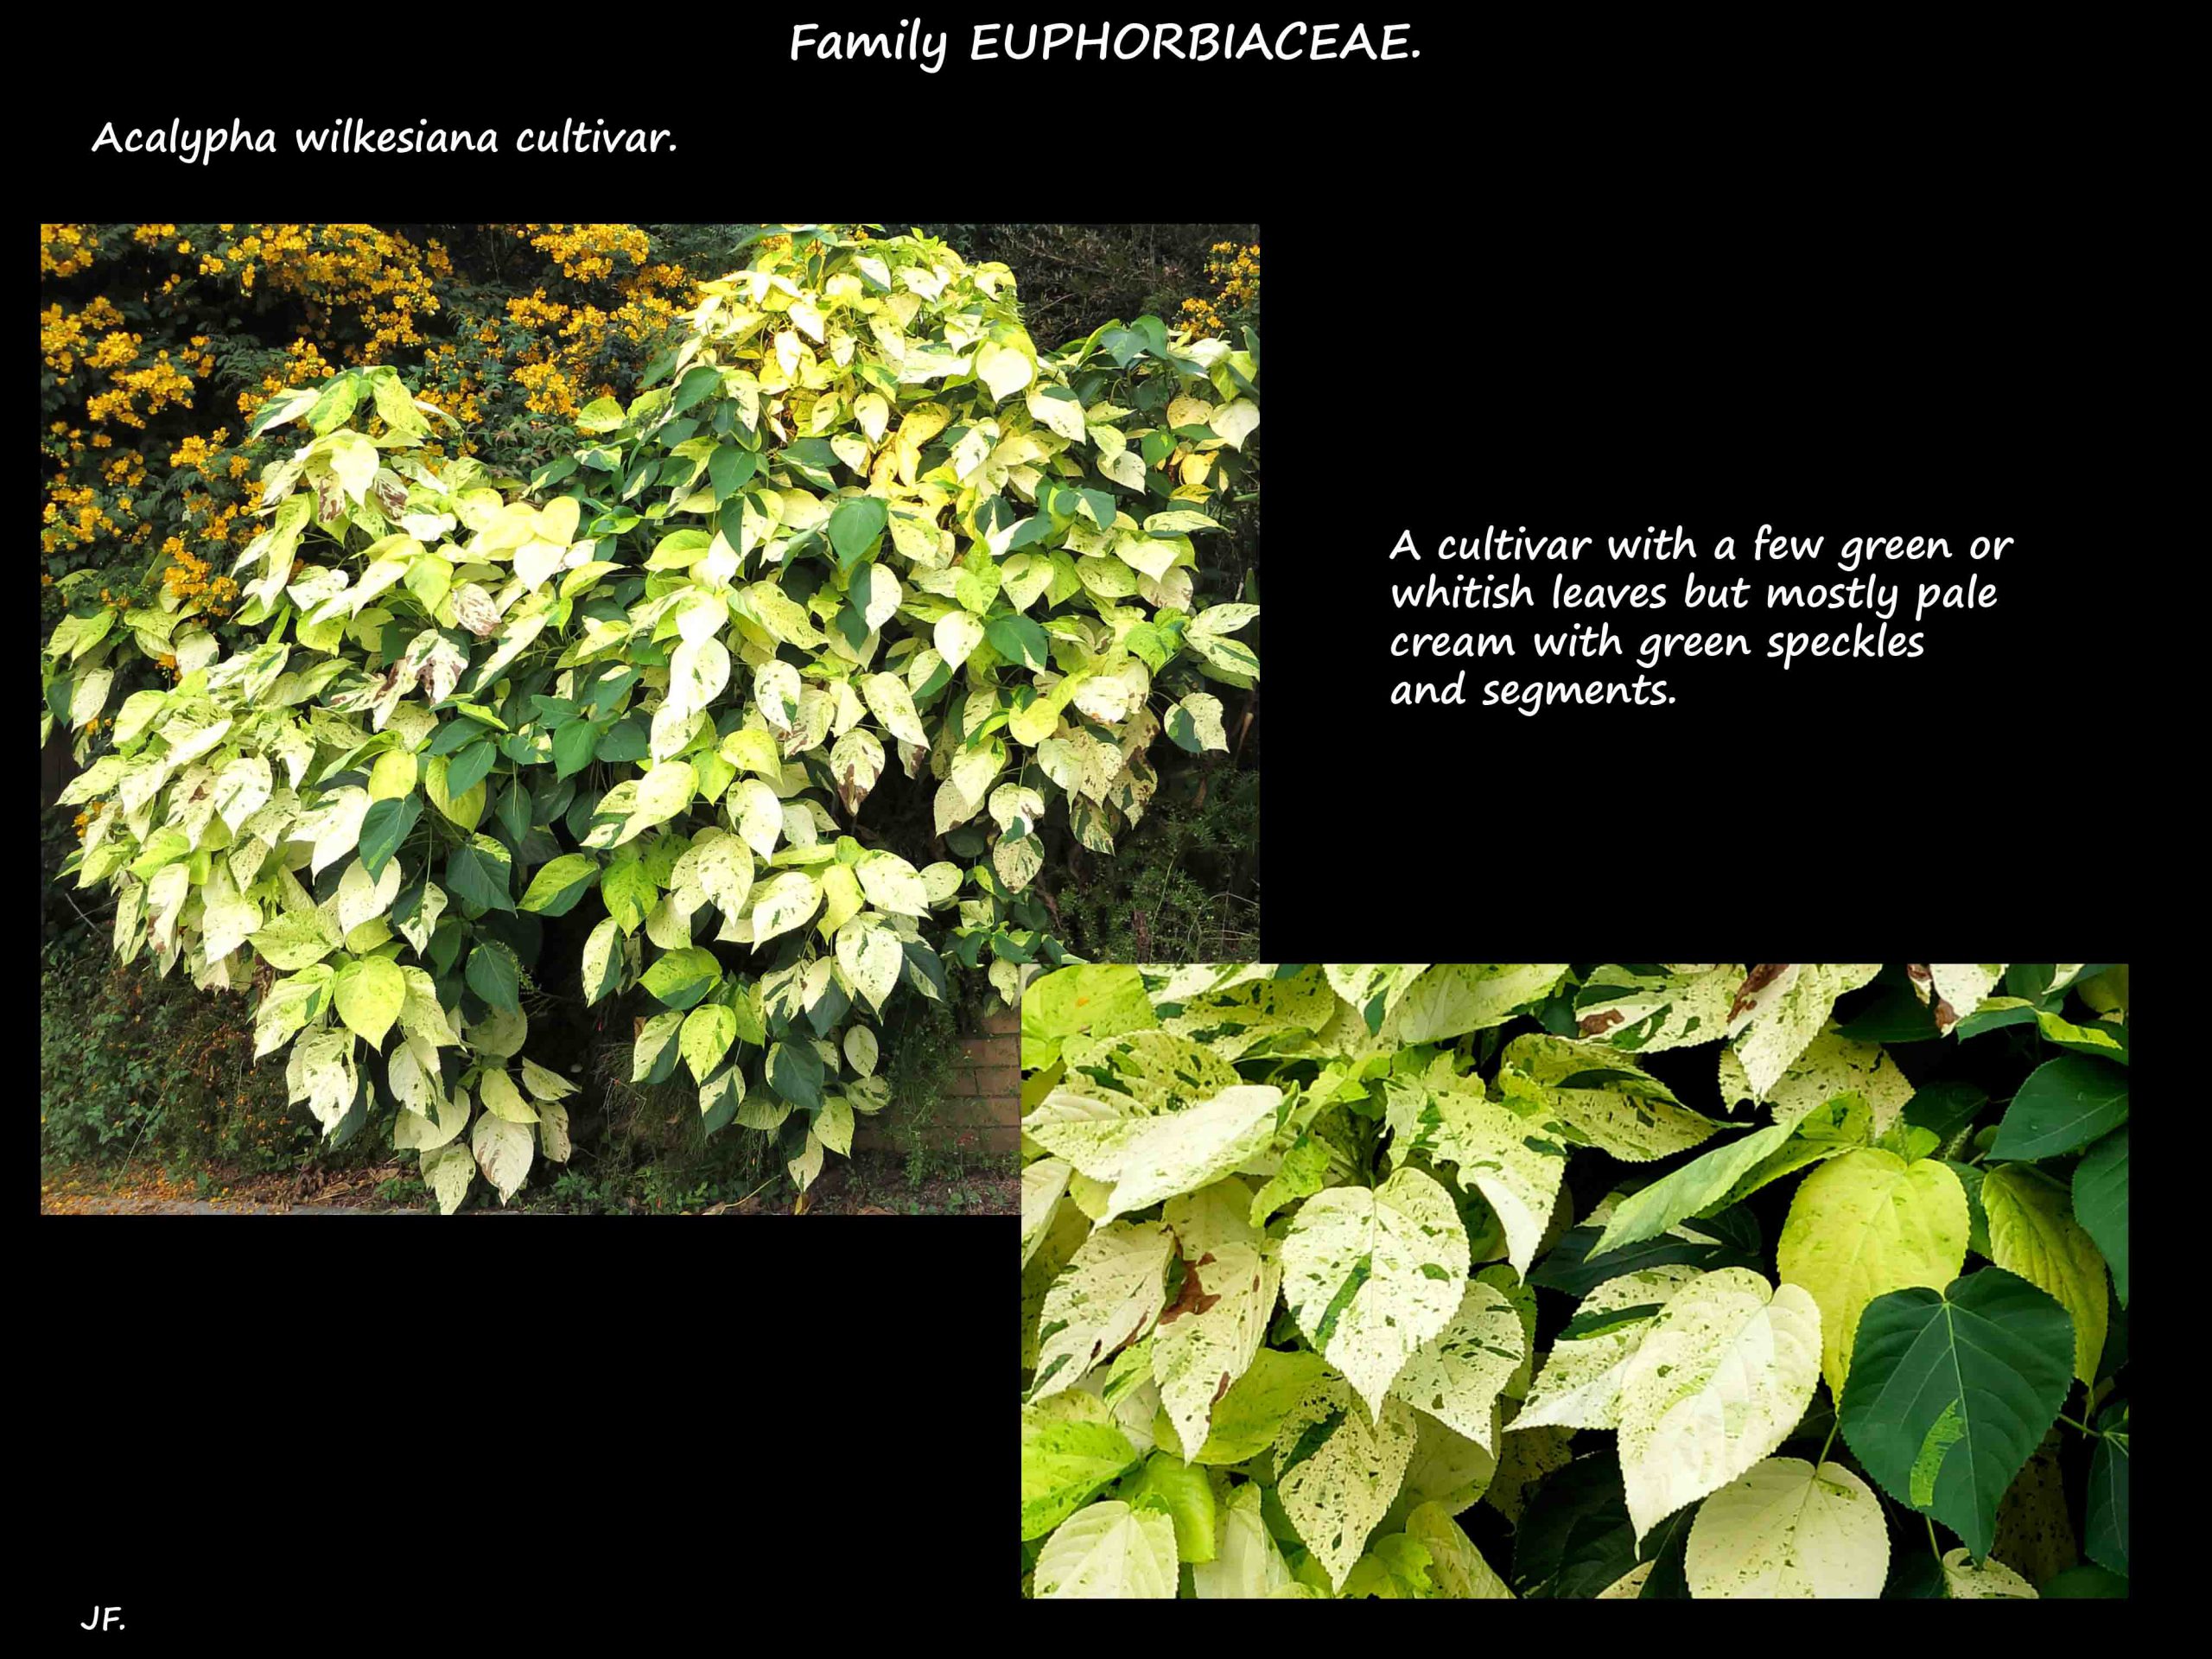 5 An Acalypha cultivar with variegated leaves